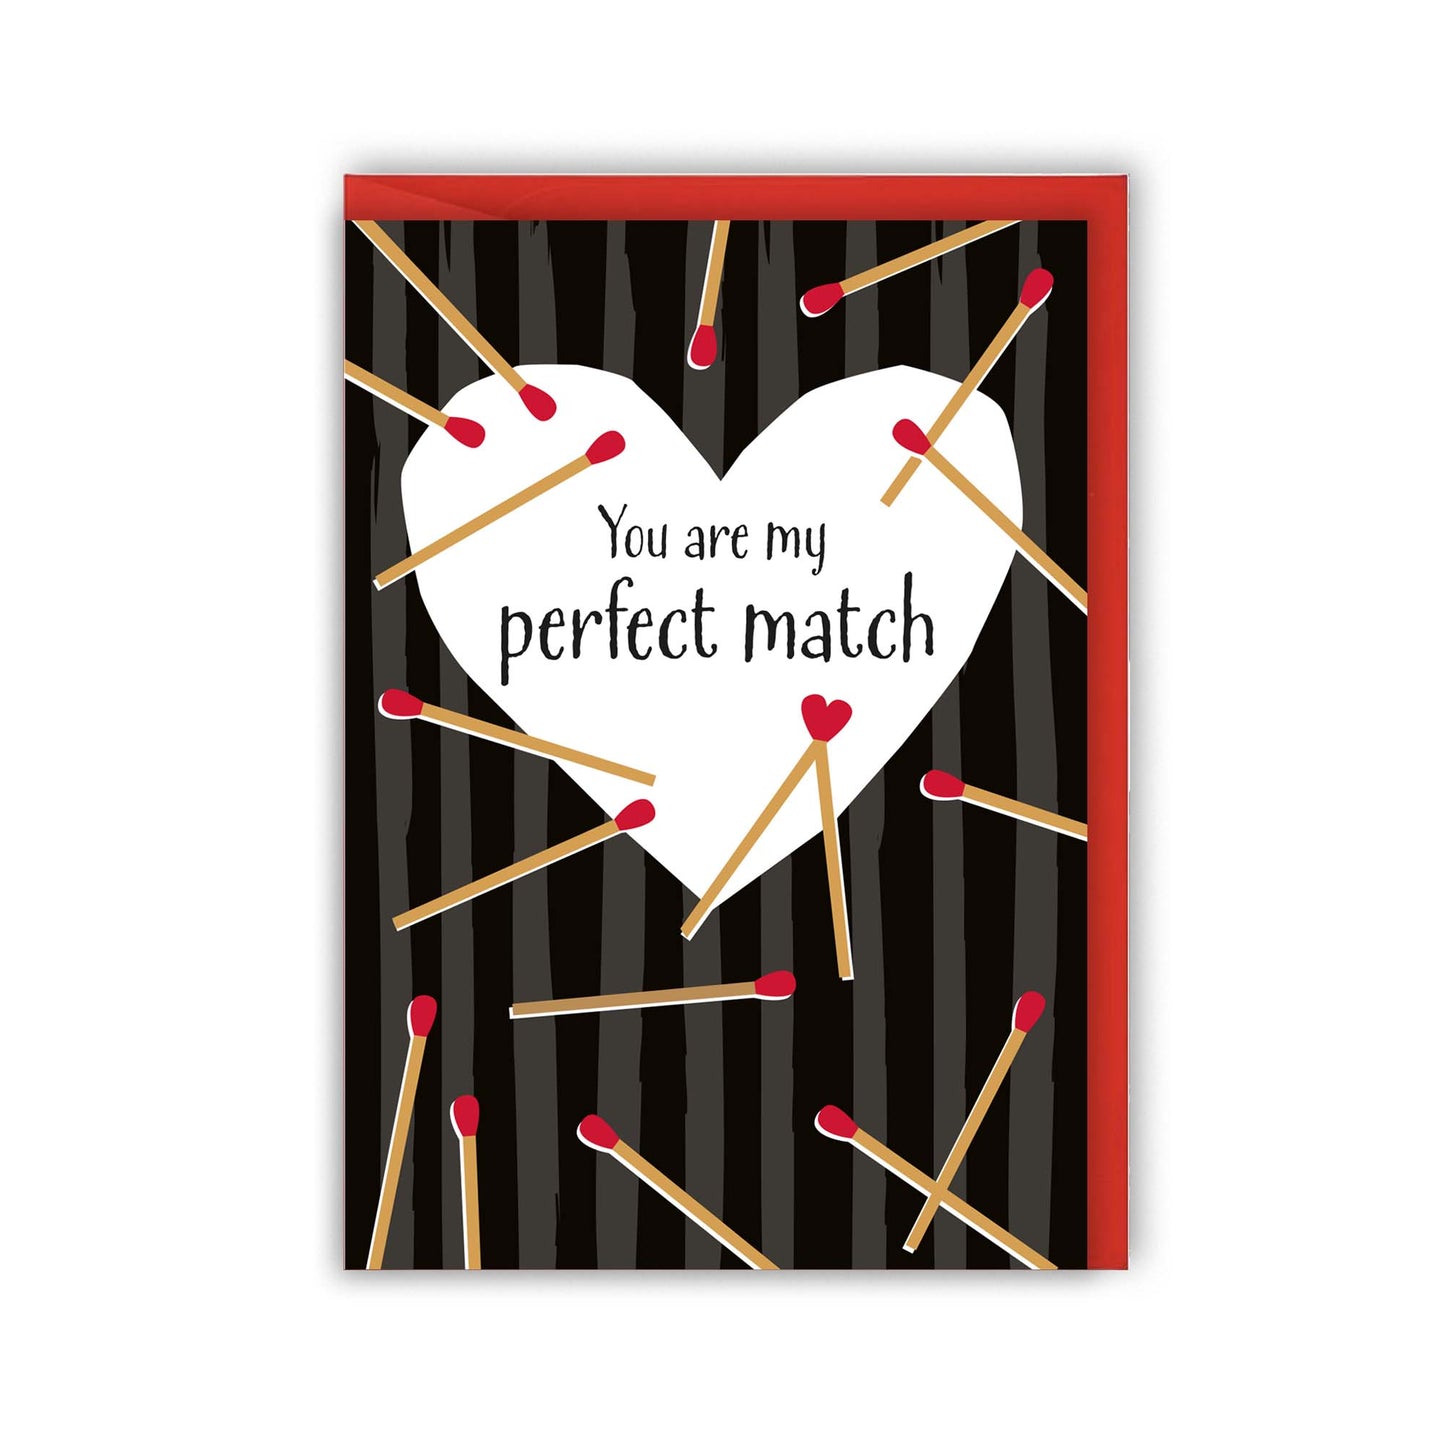 black striped background and a pattern of match sticks. Two matches  placed together form a heart shape